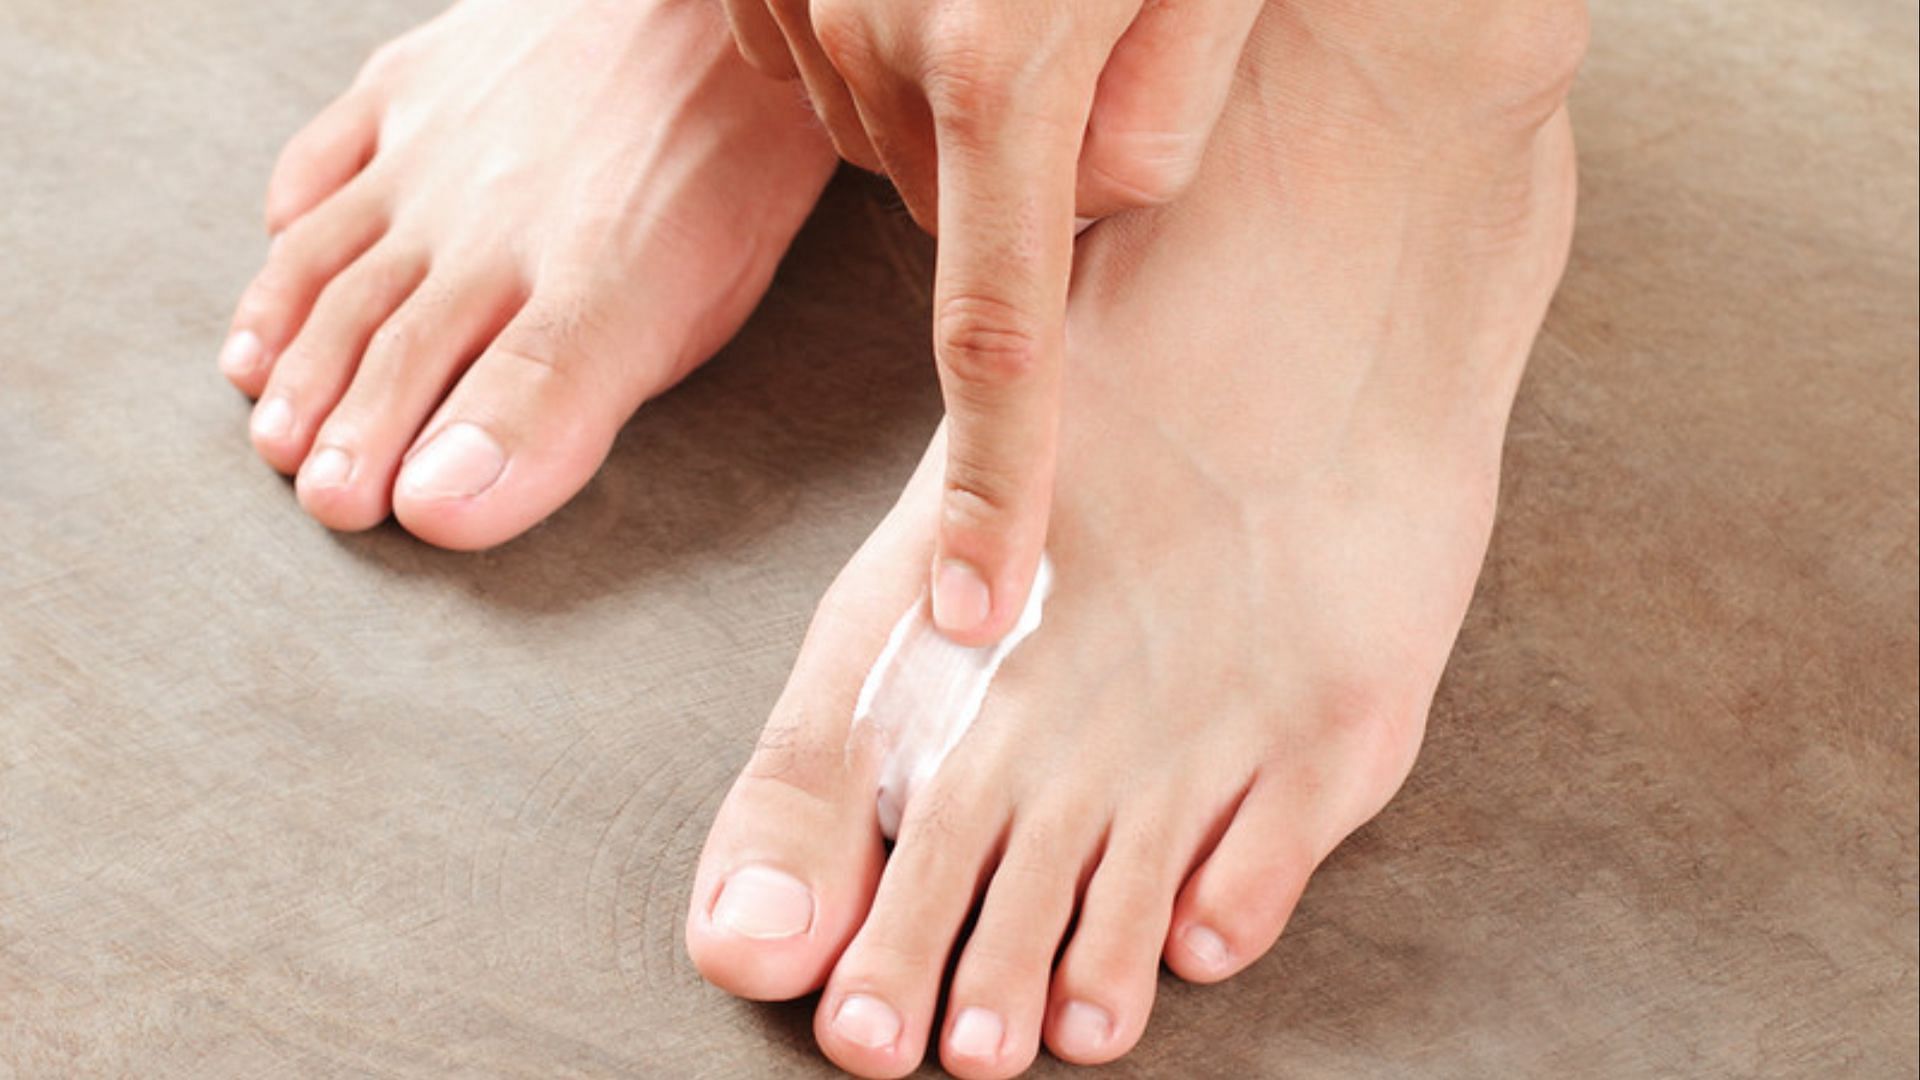 Keeping your feet clean and moisturized is the best way to prevent athlete&#039;s foot. (Image via Flickr)